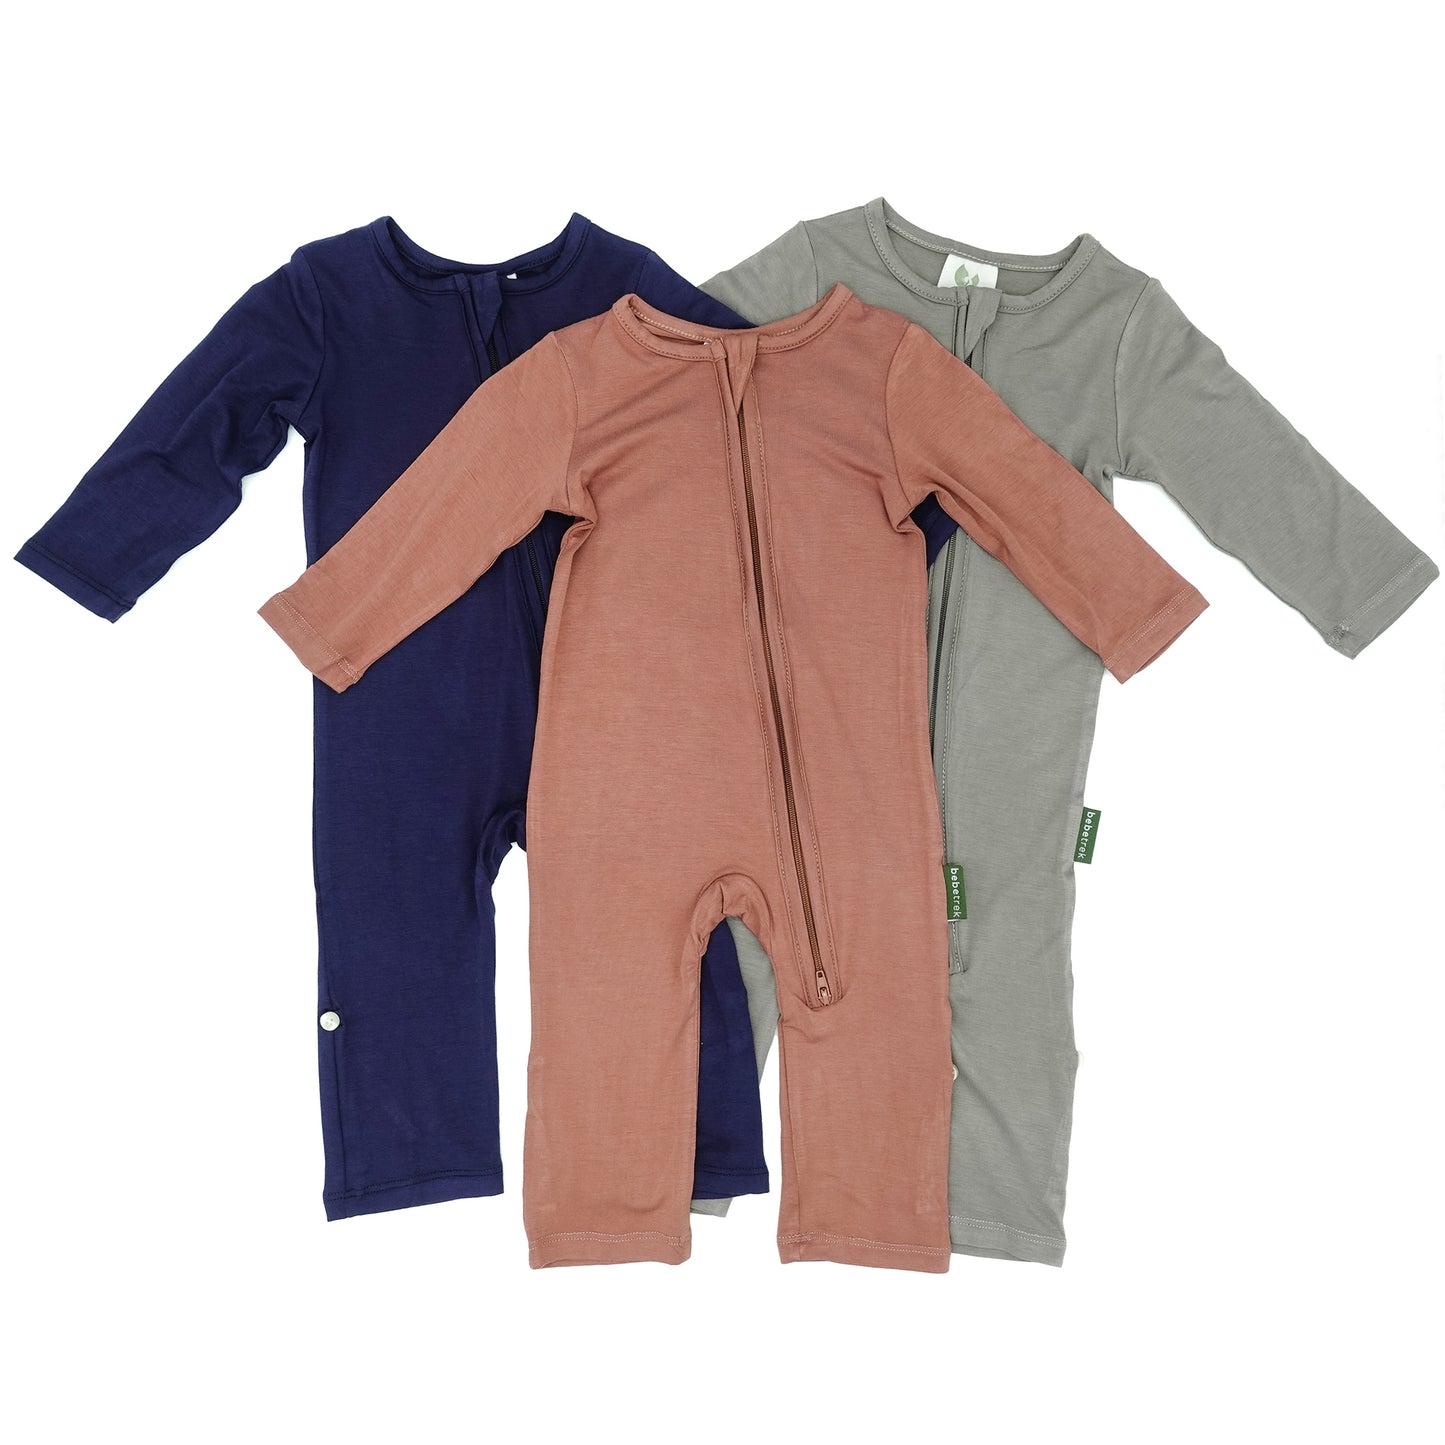 UPF 50+ full body sunsuits for babies